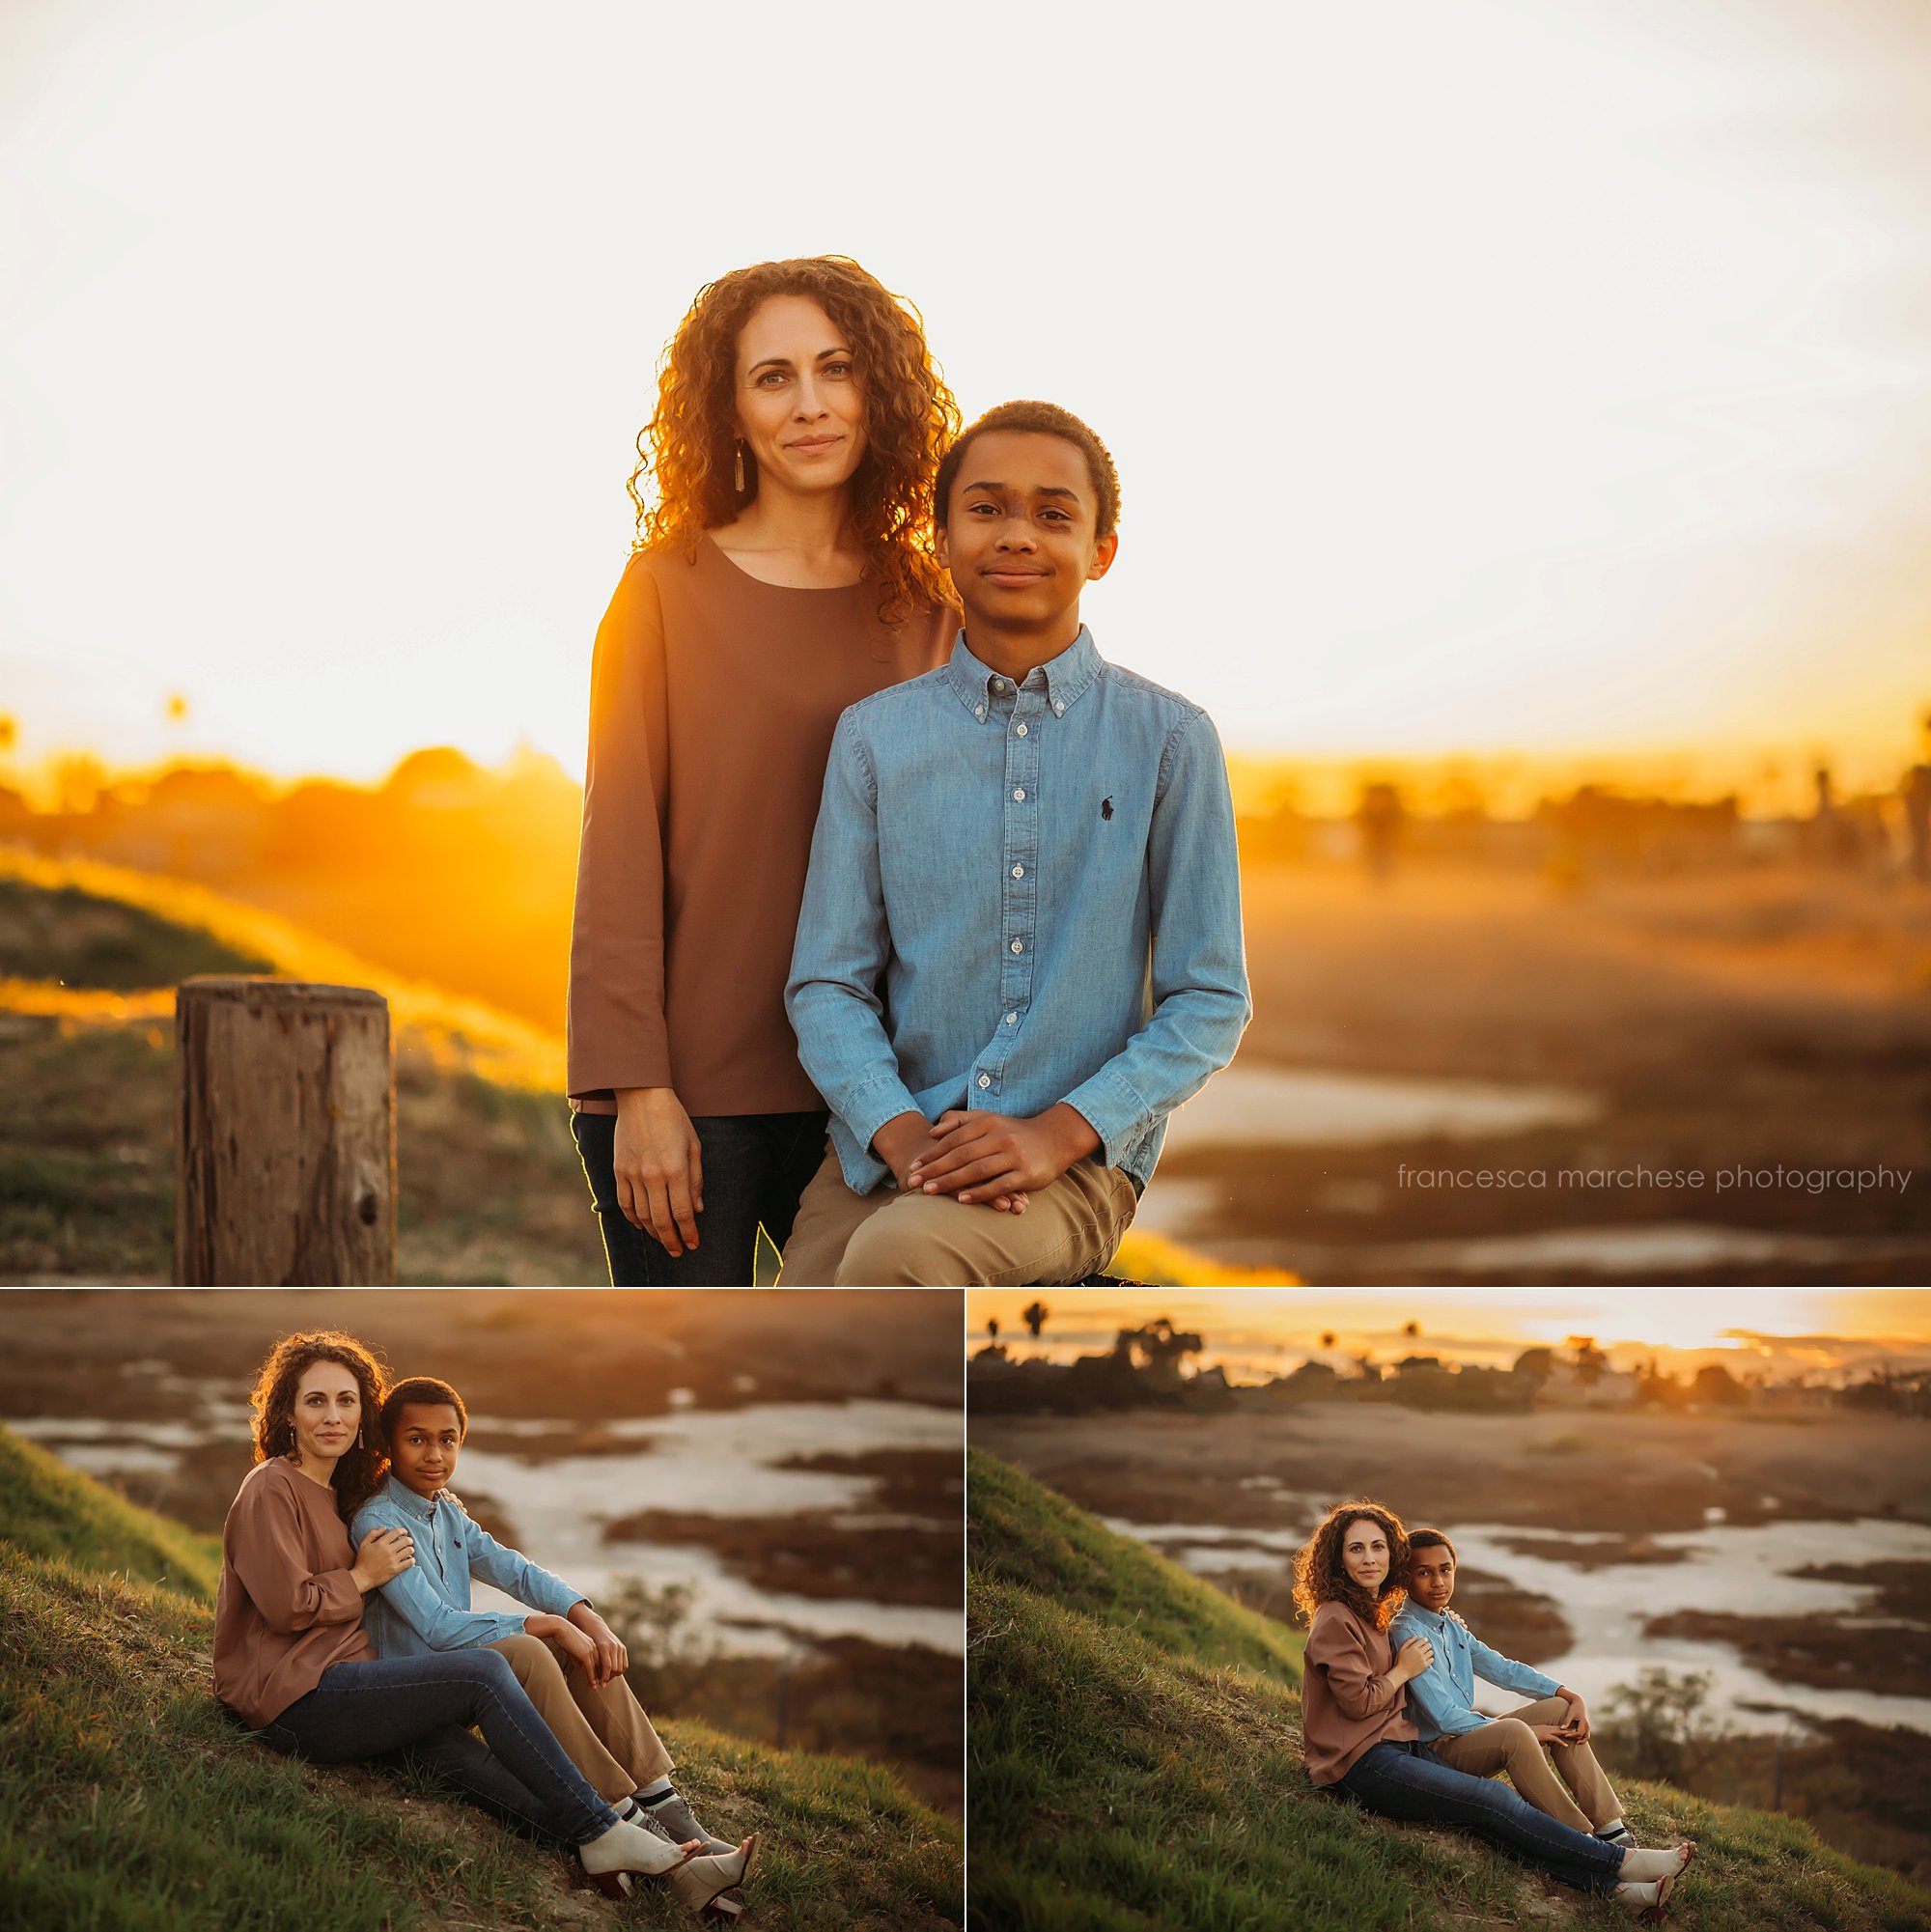 Francesca Marchese Photography motherhood photography session mother and son golden hour sunset session